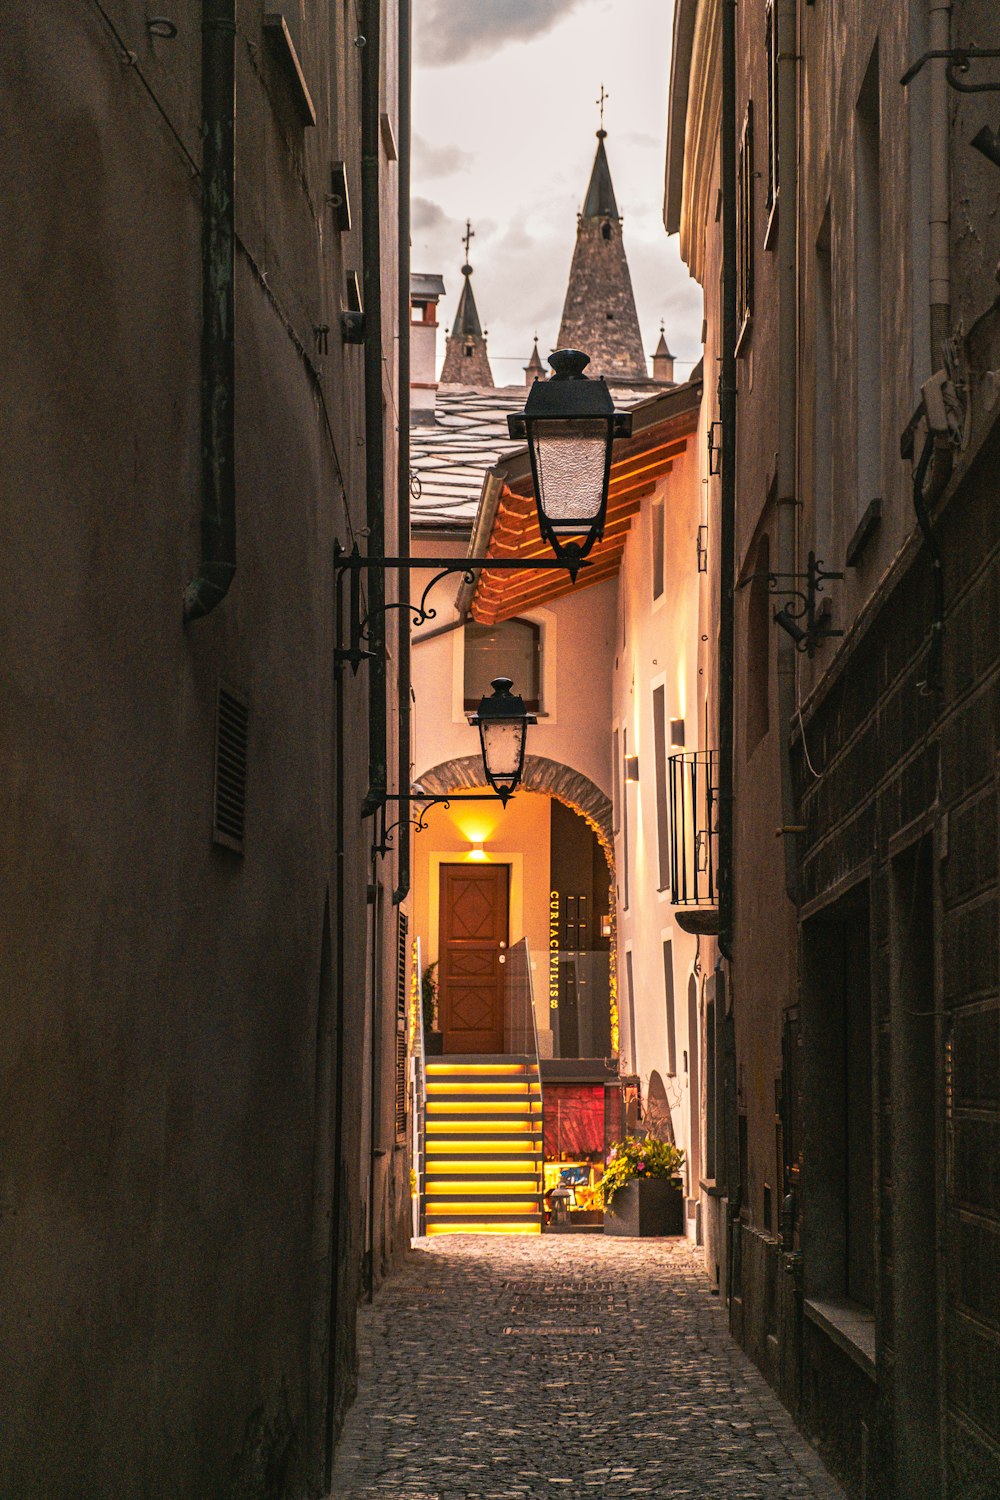 a narrow alley way with a lamp post and steeple in the background